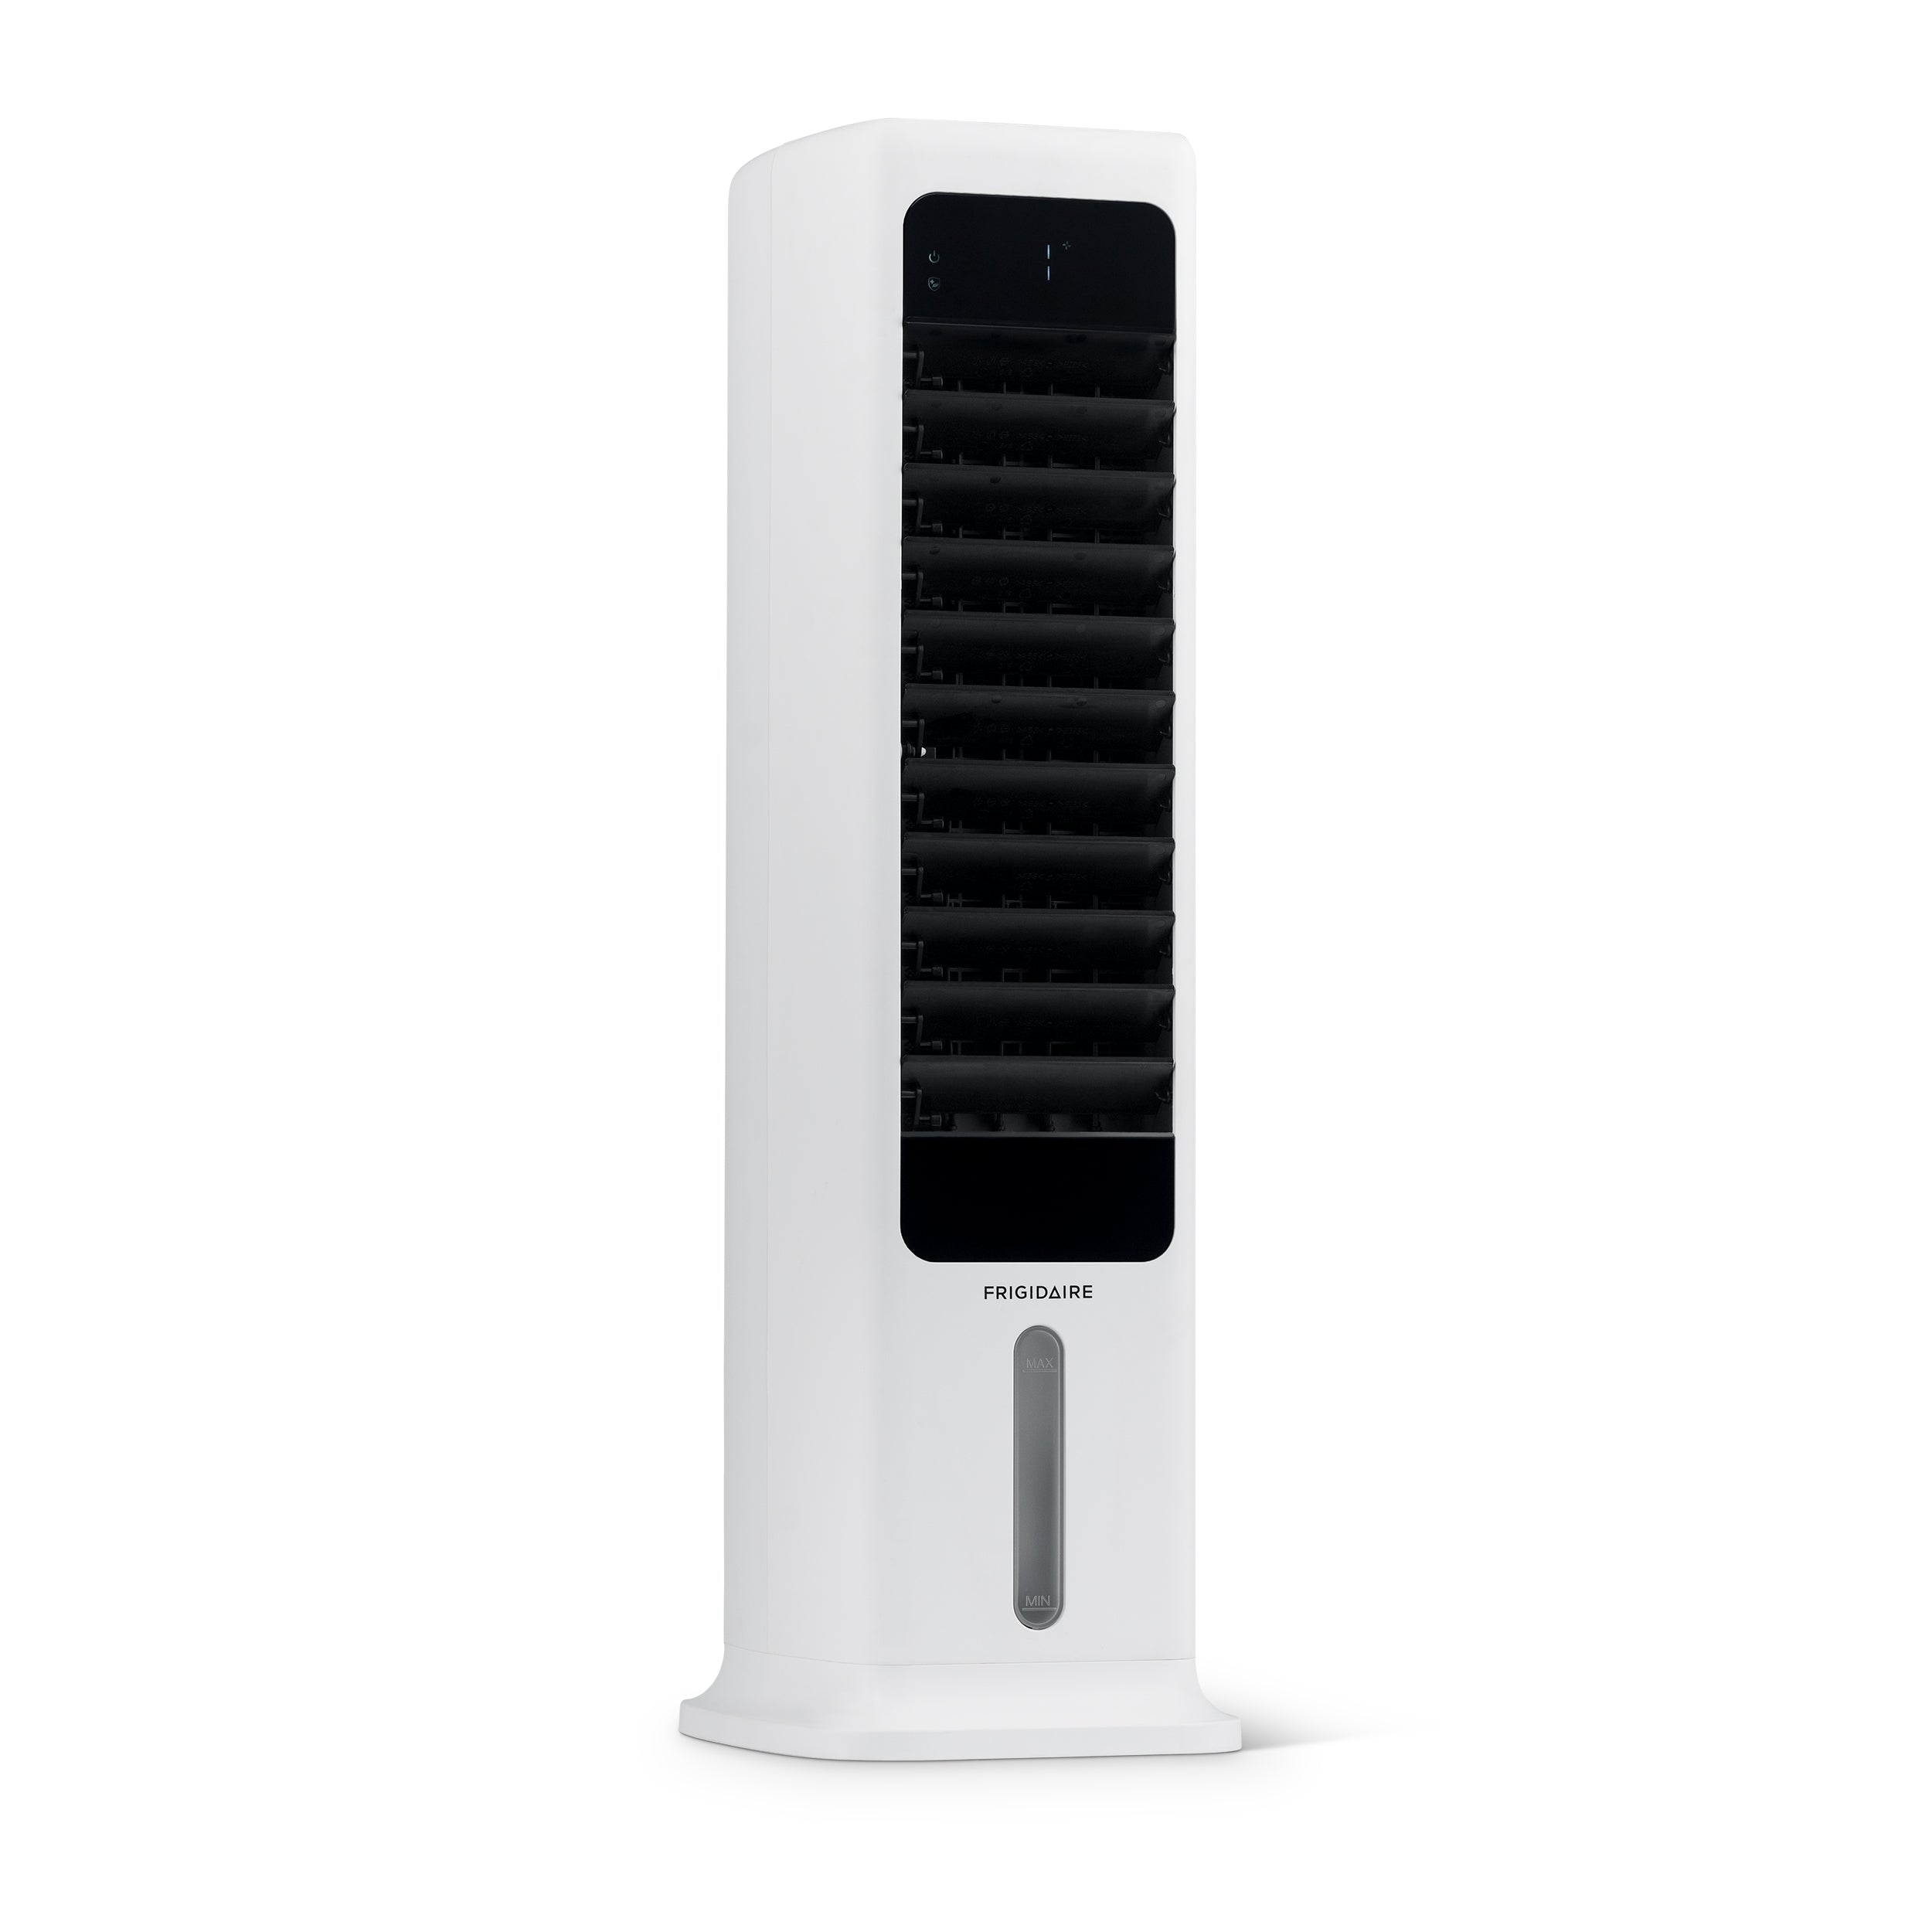 Frigidaire 2-in-1 Evaporative Air Cooler and Tower Fan, Cools up to 215 sq. ft. Slim Contemporary Design